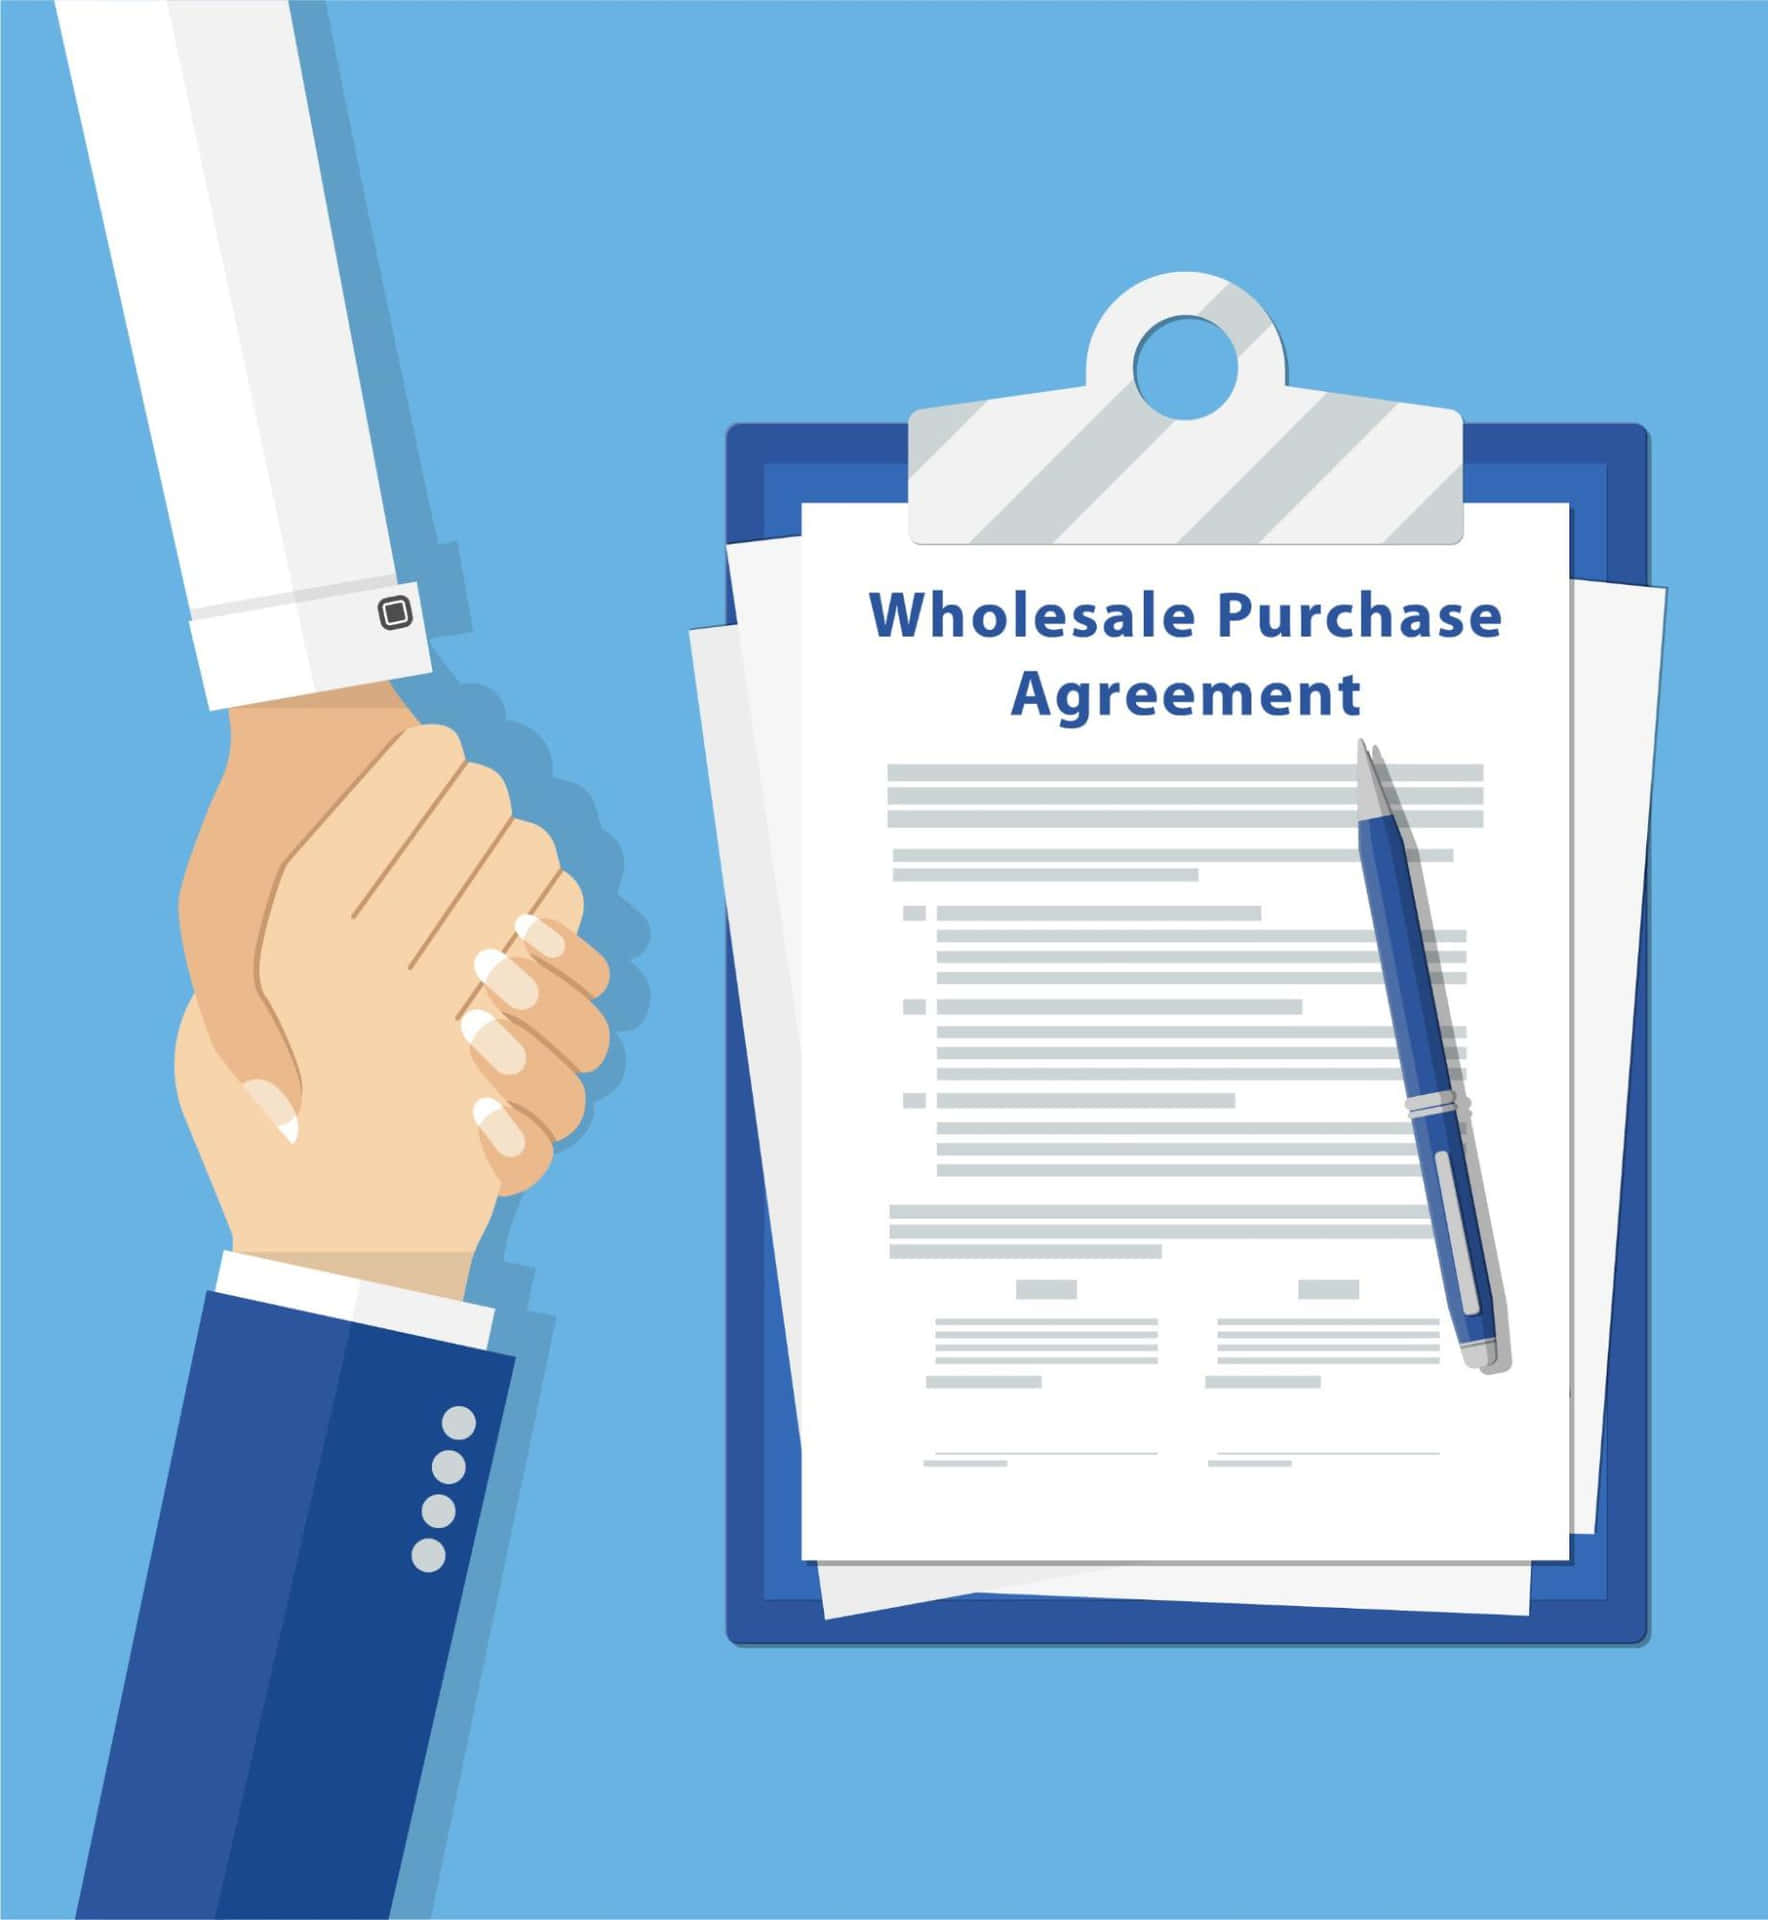 Wholesale Purchase Agreement Wallpaper